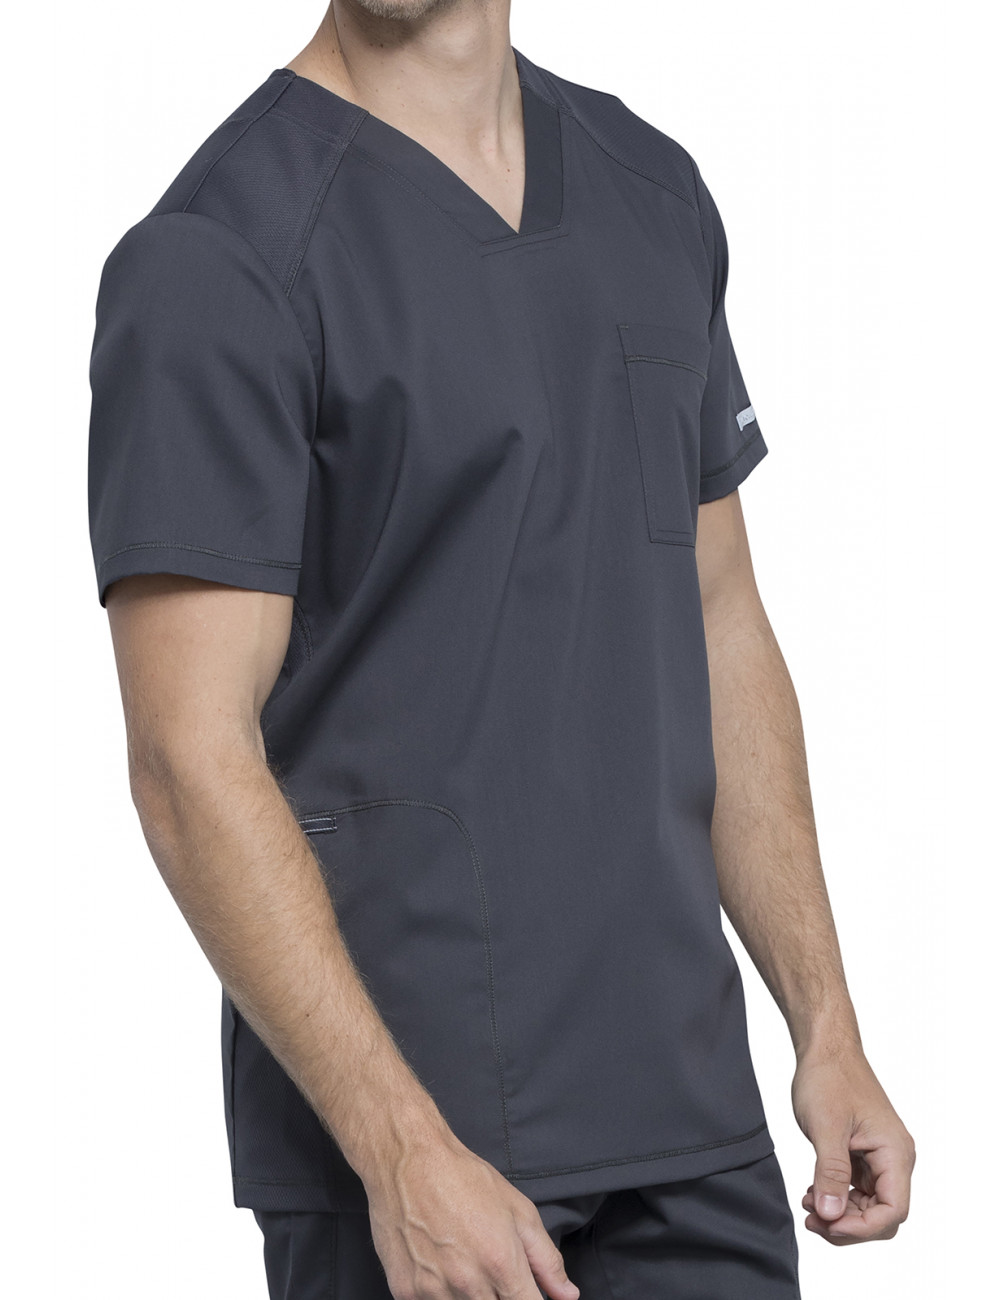 Anglet - Tunique médicale - Col V - Manches courtes - Homme - 72 cm - Cherokee